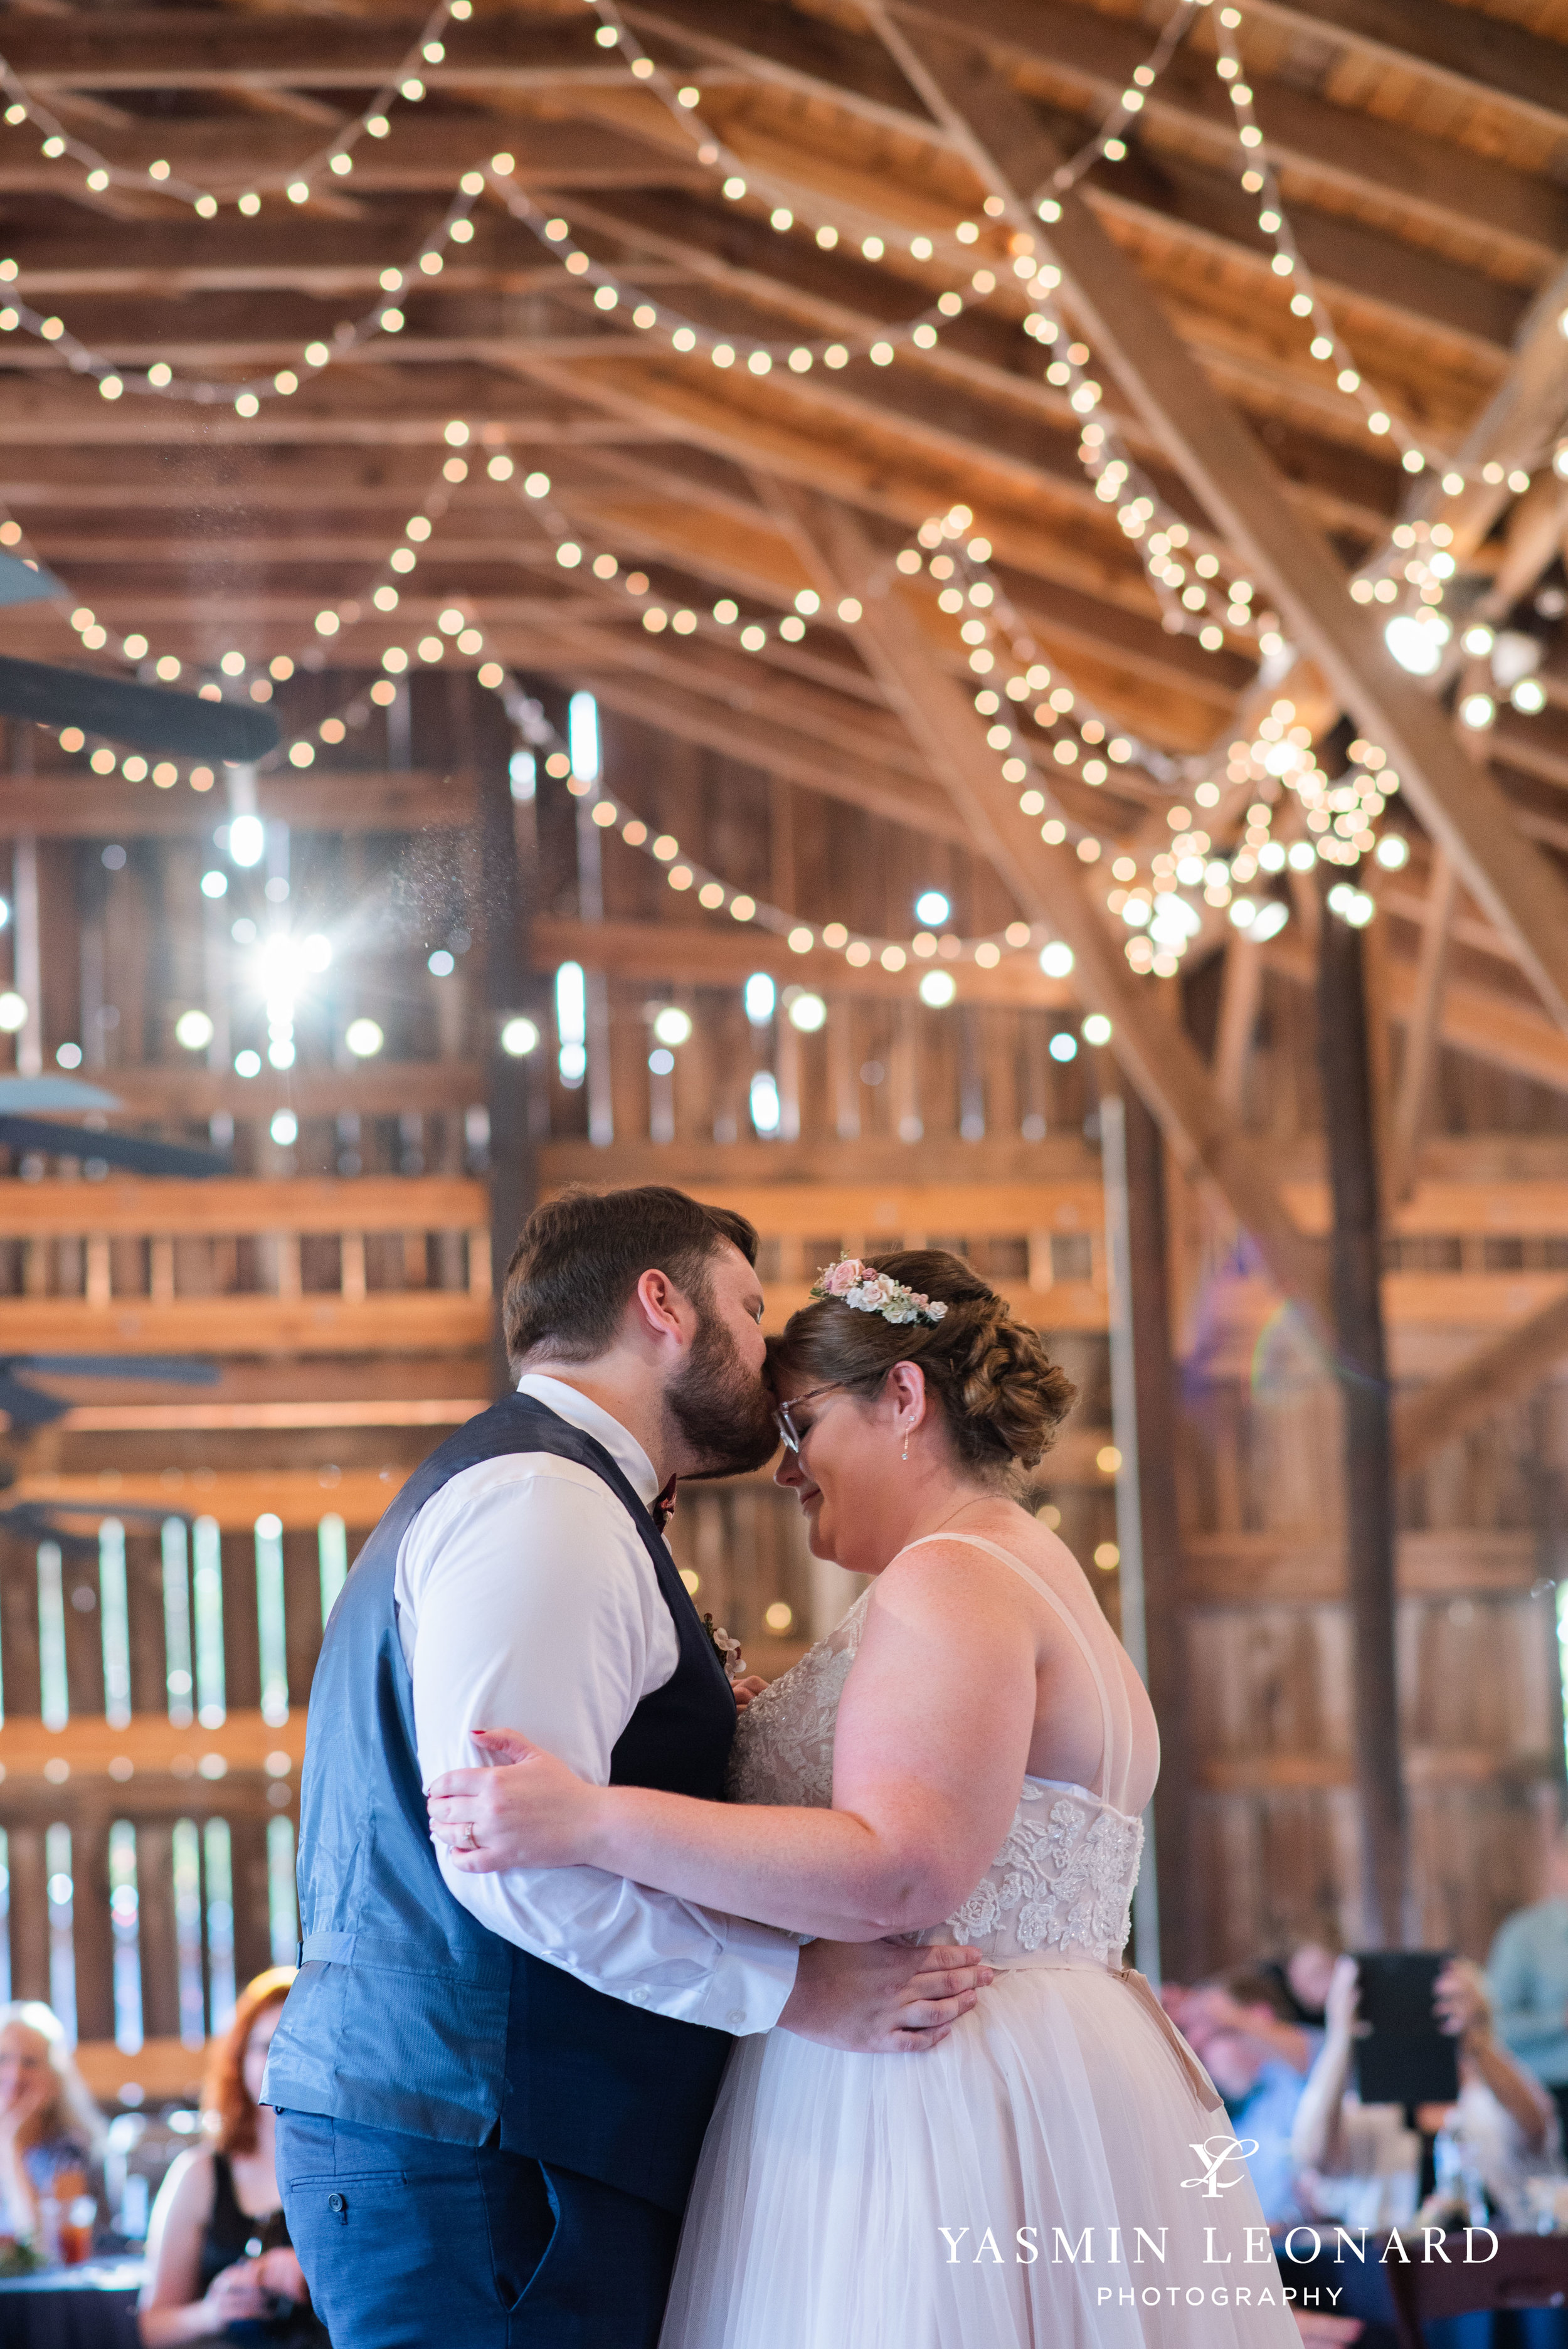 Hannah and David - l'abri at Linwood - NC Barn Weddings - Guys and Girls on Bride's Side - How to incorporate guys with bridesmaids - navy fall wedding - high point photographer - nc wedding venues - triad weddings-40.jpg